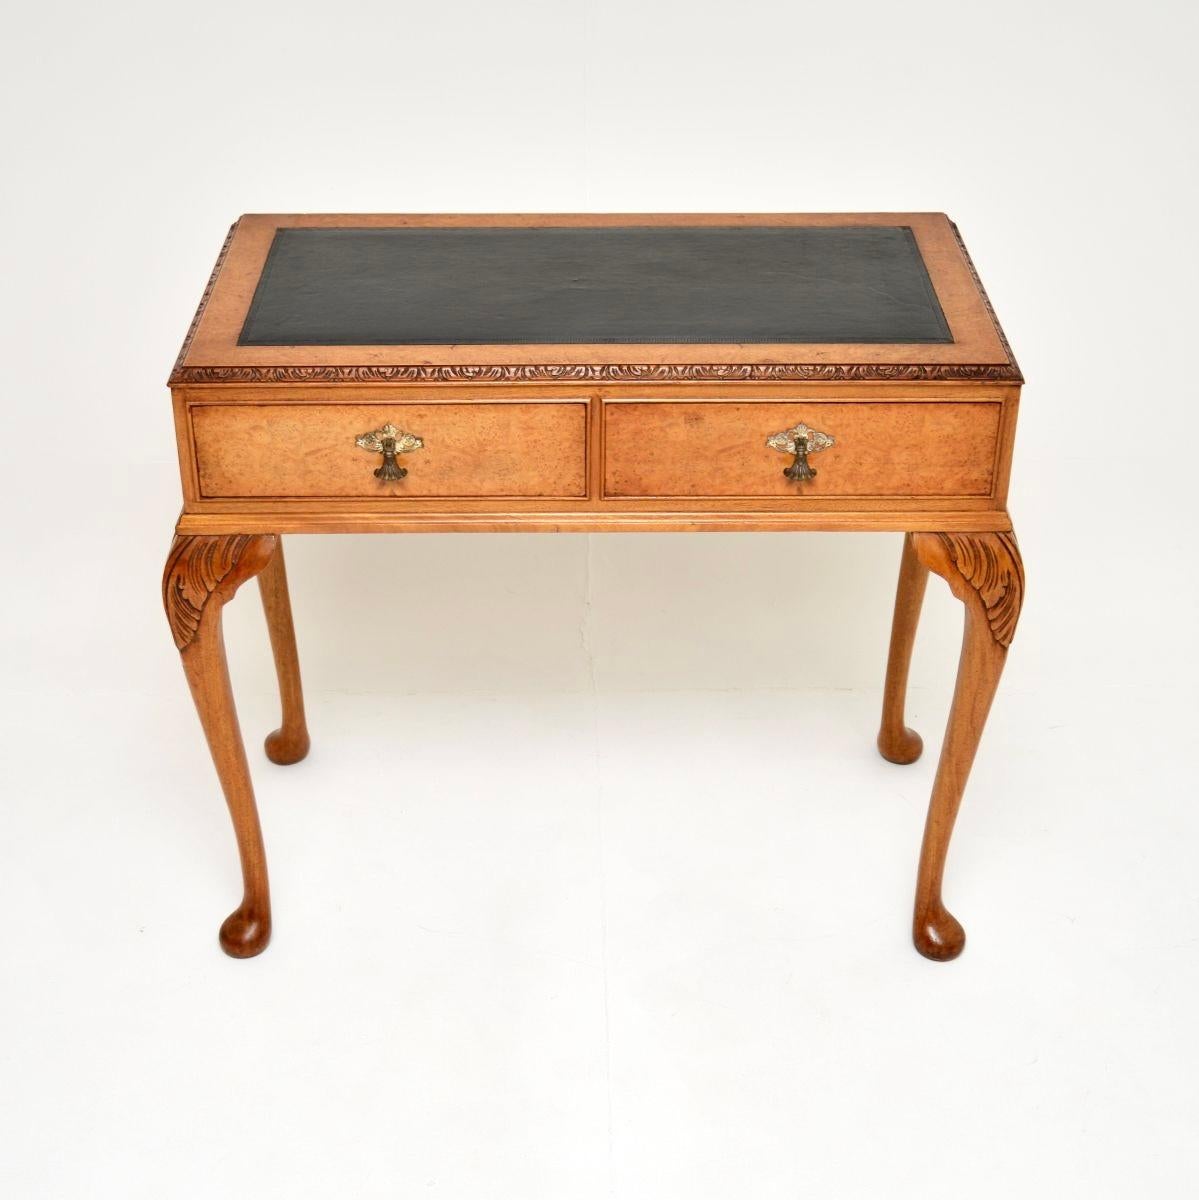 A smart and very well made antique burr walnut leather top writing table / desk. This was made in England, it dates from around the 1930’s.

The quality is superb, this is a lovely compact size. There is an inset tooled leather top, this sits on